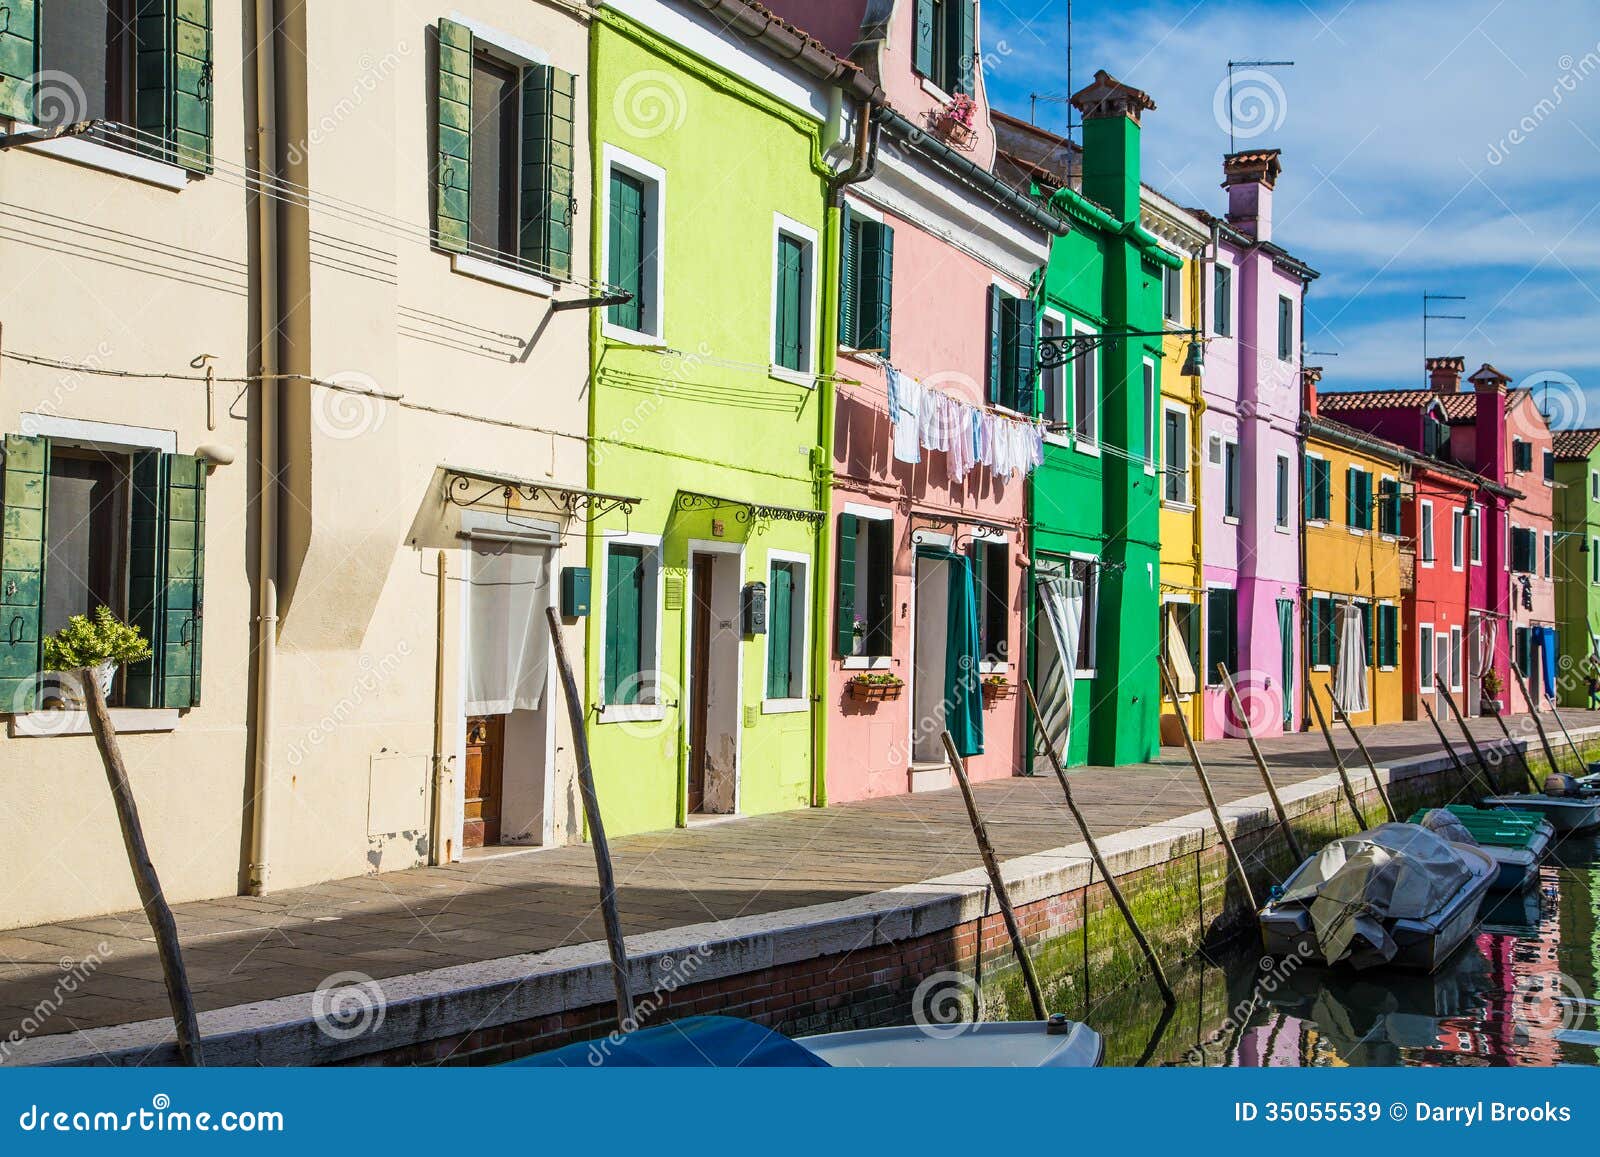  Free Stock Images: Laundry on Colorful Burano Buildings by Canal